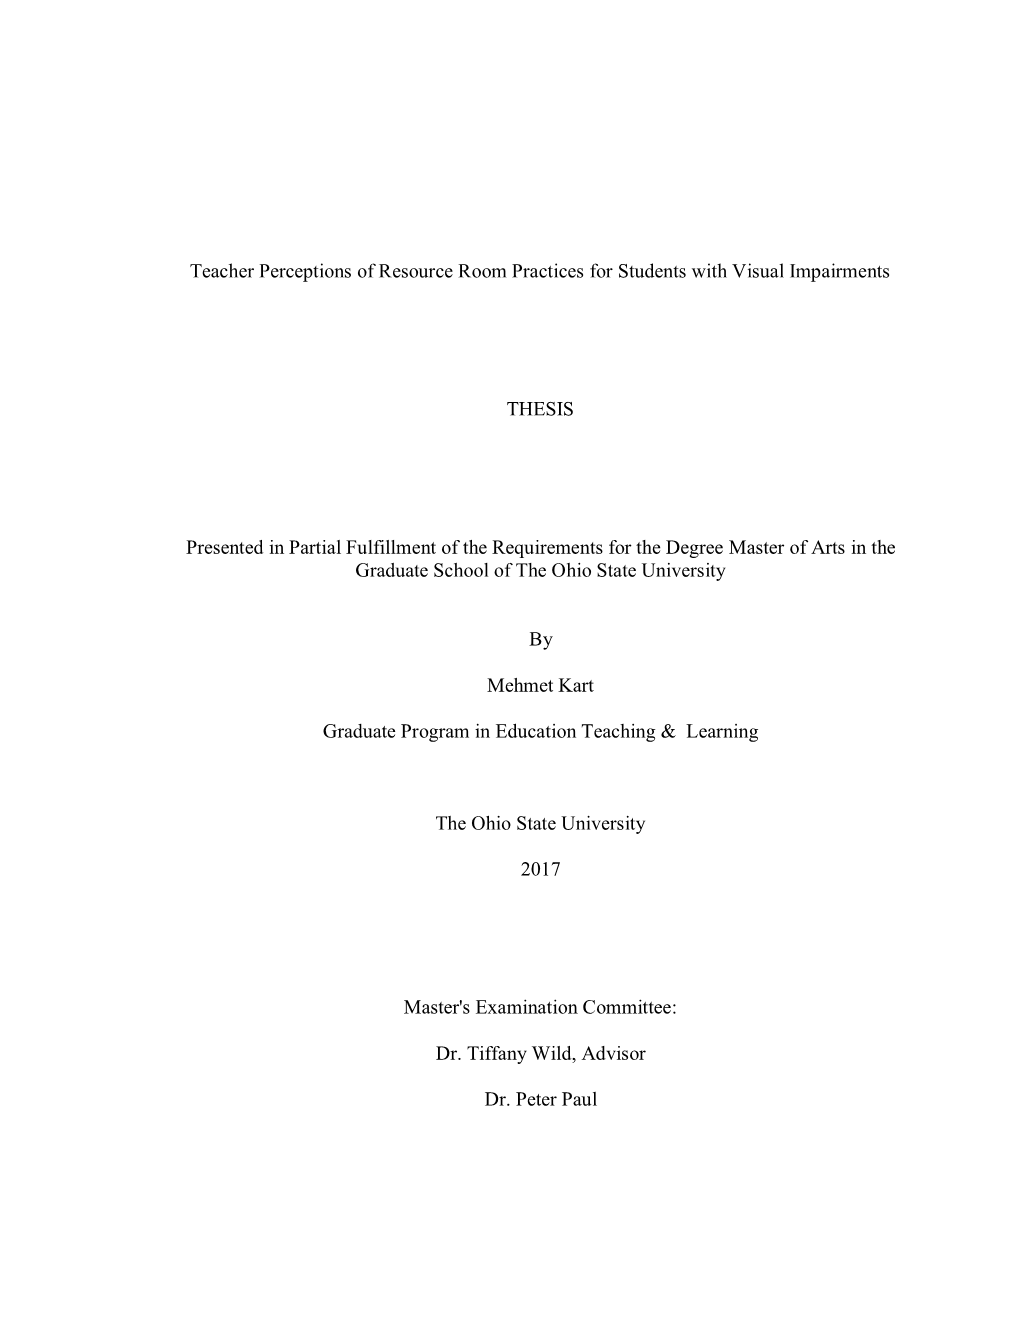 Teacher Perceptions of Resource Room Practices for Students with Visual Impairments THESIS Presented in Partial Fulfillment of T